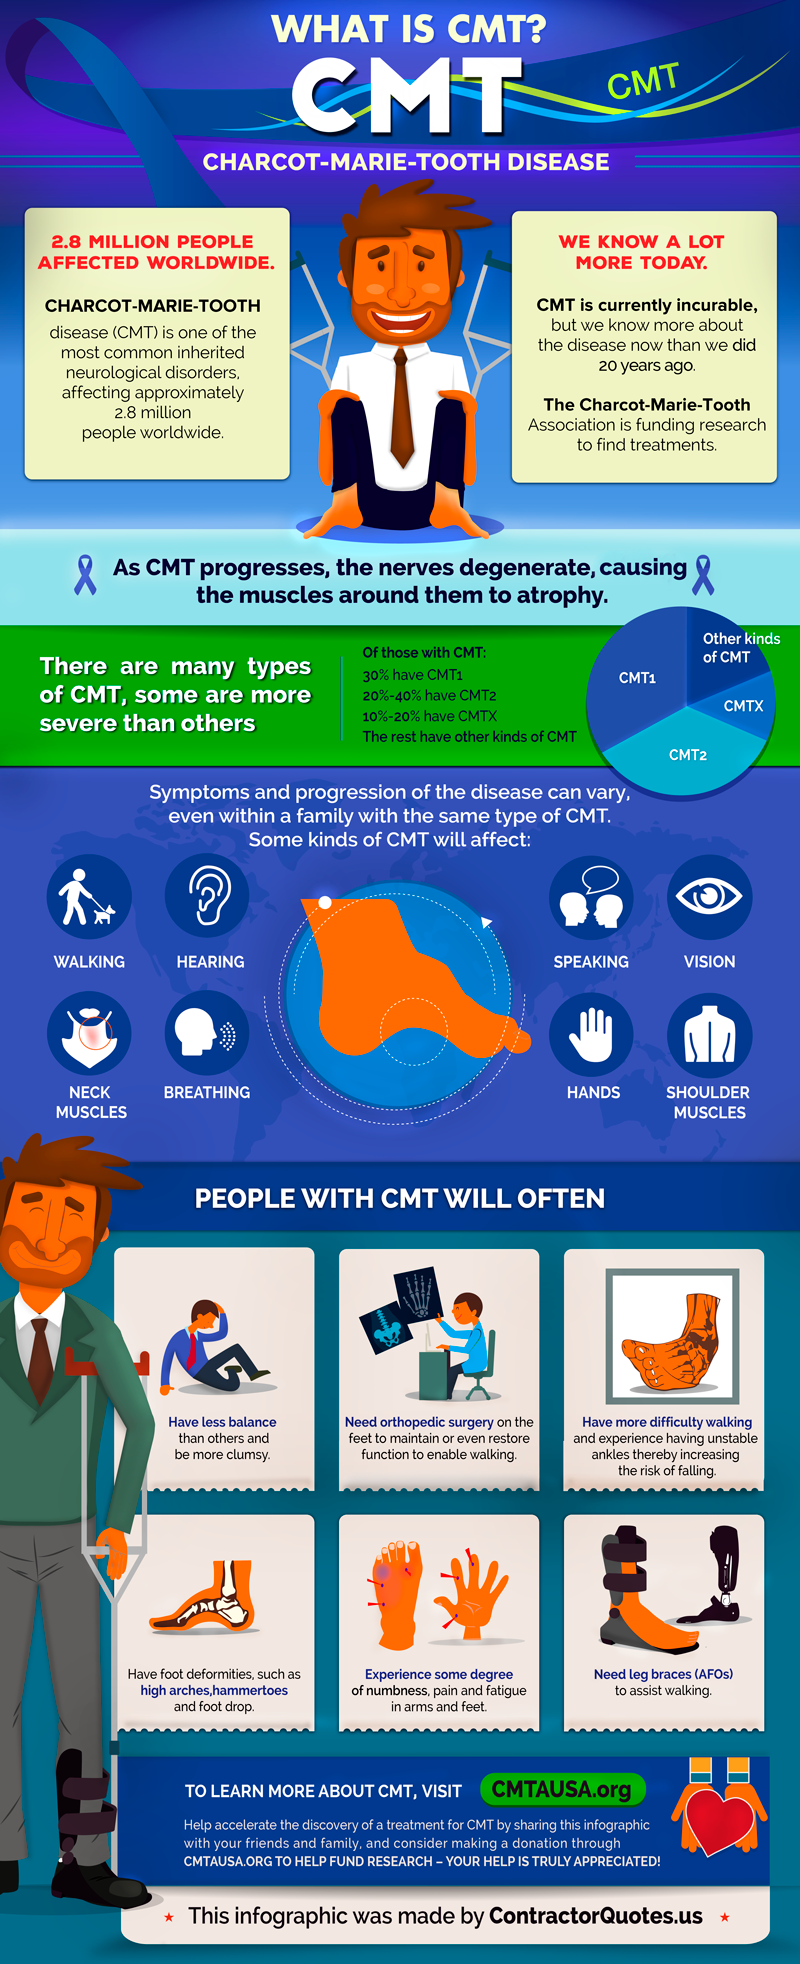 what is cmt disease?